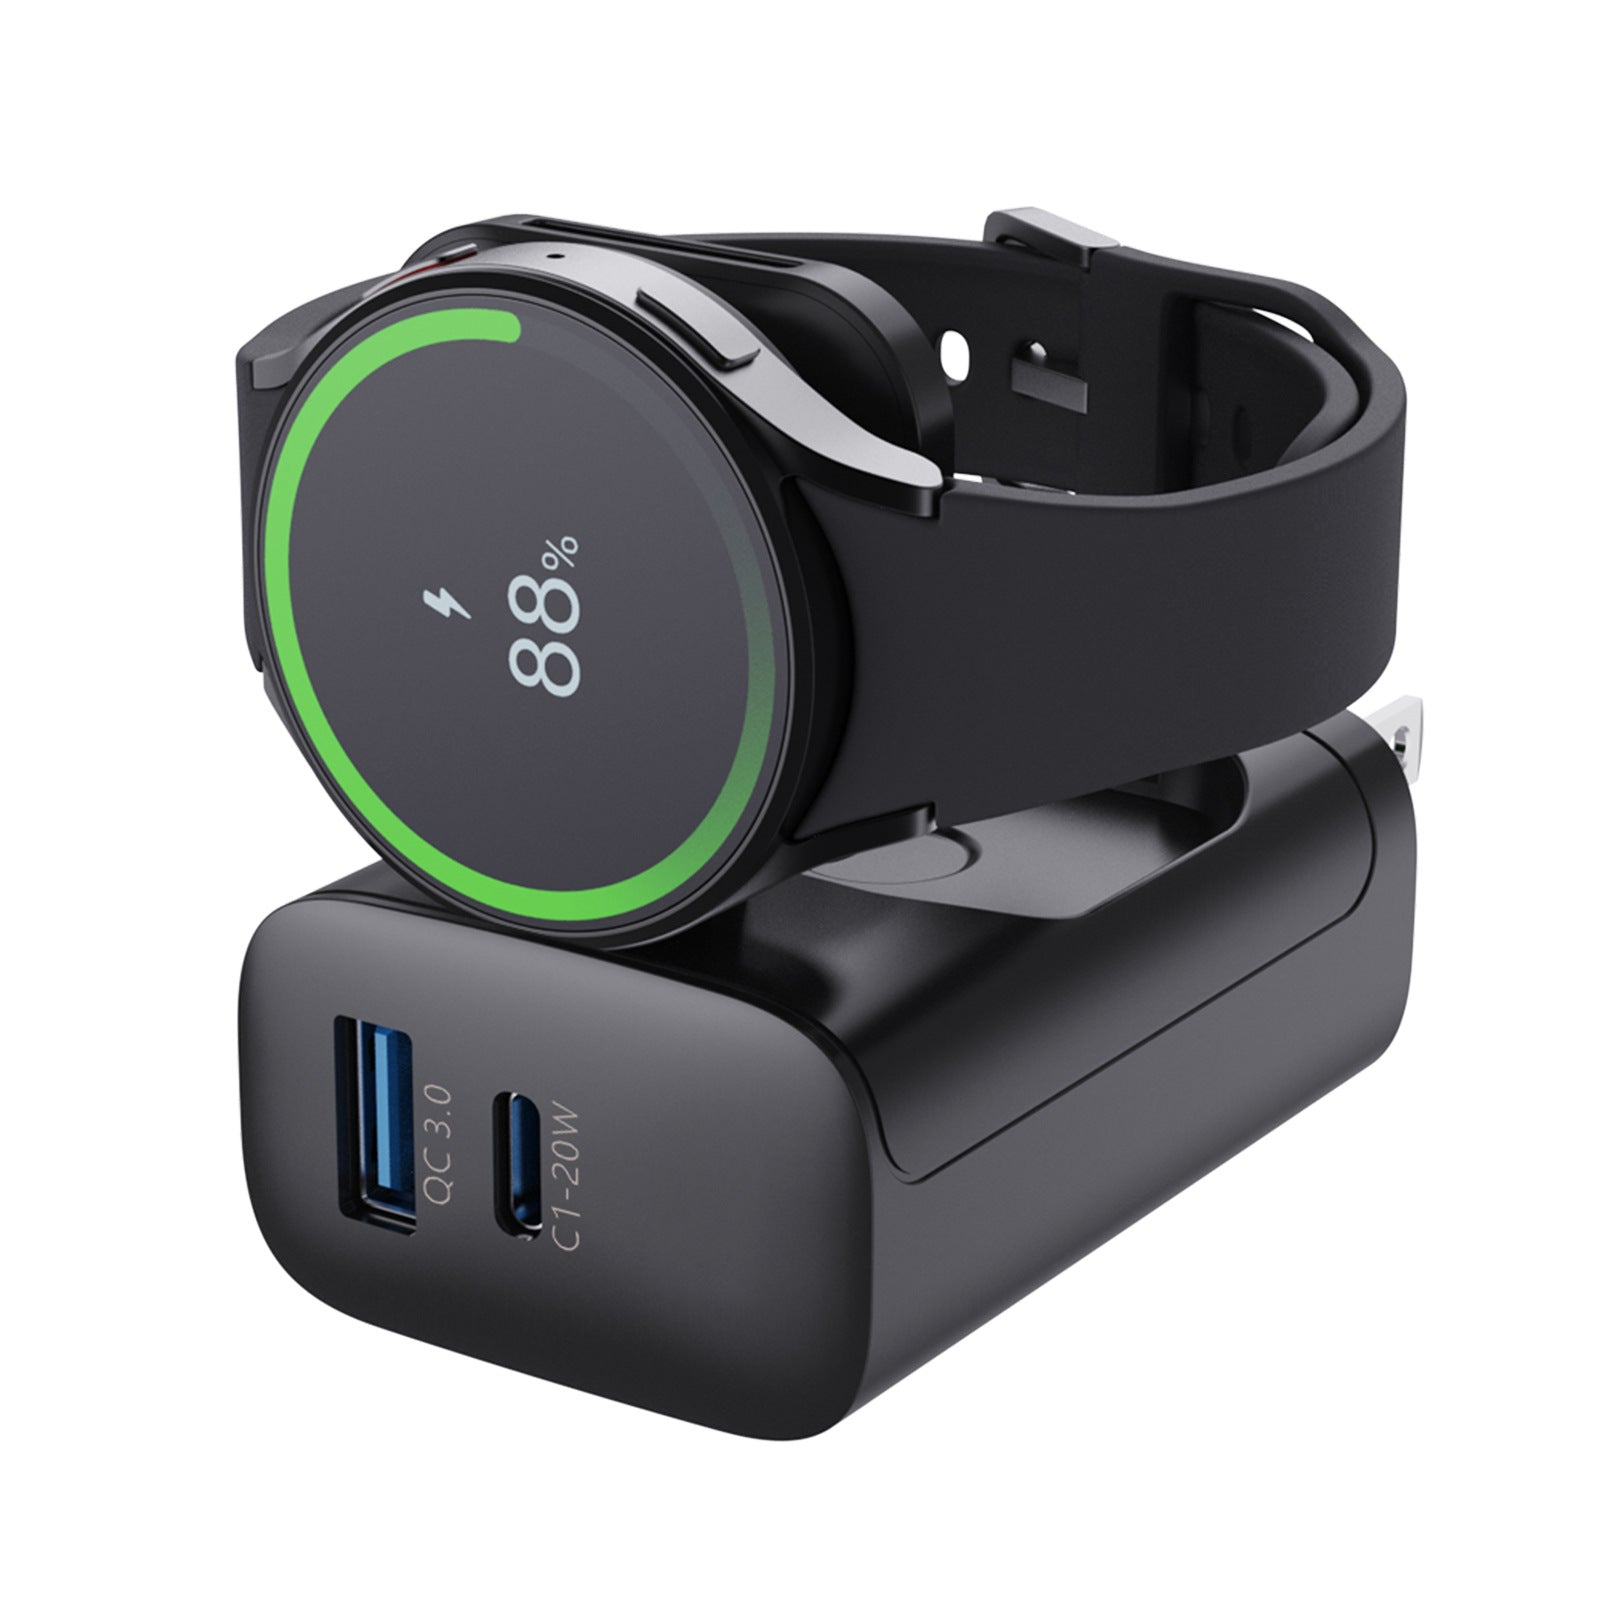 193TN All-in-One Wall Charger with Smart Watch Compatibility